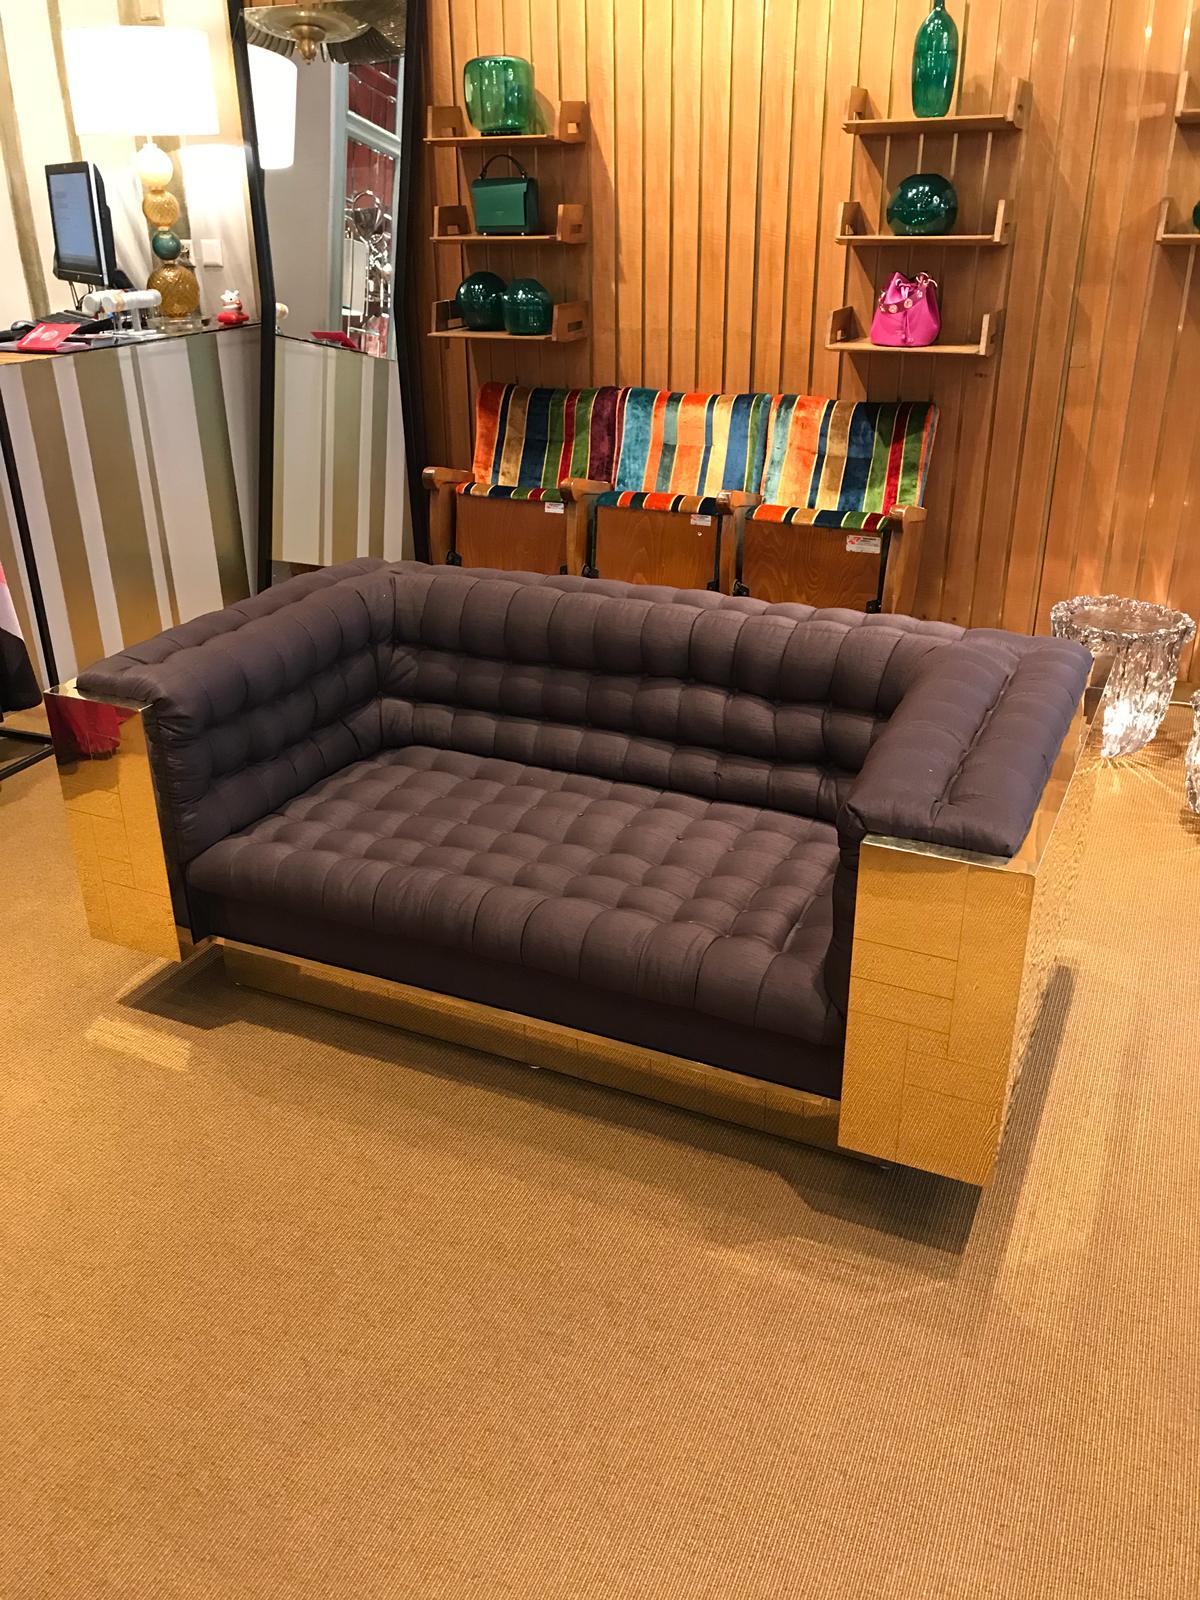 Cityscape sofa designed by Paul Evans for Directional, circa 1970. Sofa is in very good condition, the seat foam and the textil covering have been restored respecting the original colors.
The geometric metal patchwork design is comprised of varying